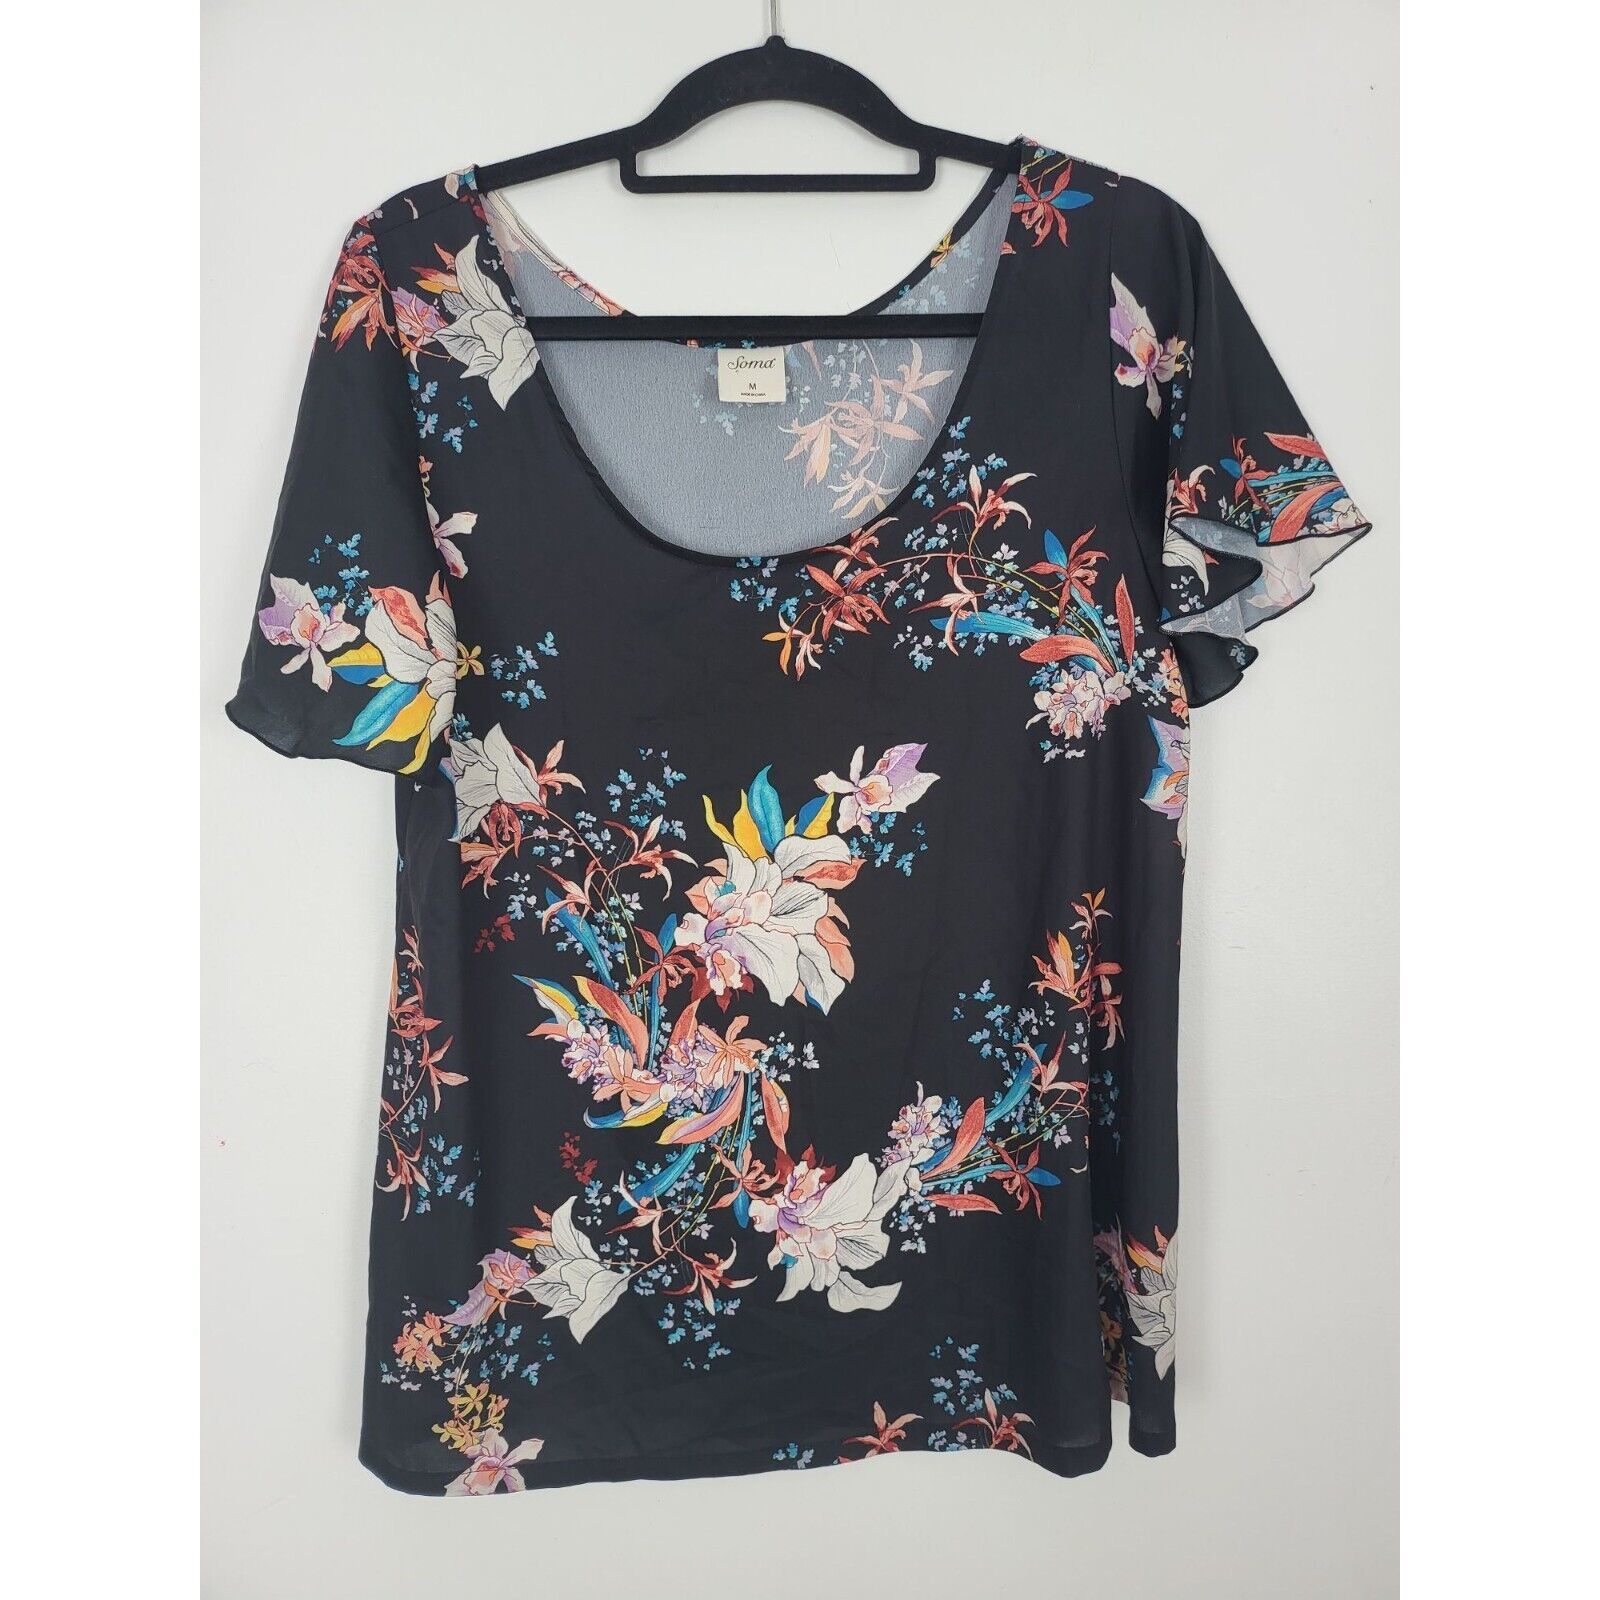 Primary image for Soma Blouse Medium Womens Black Floral Crew Neck Pullover Sheer Top Casual